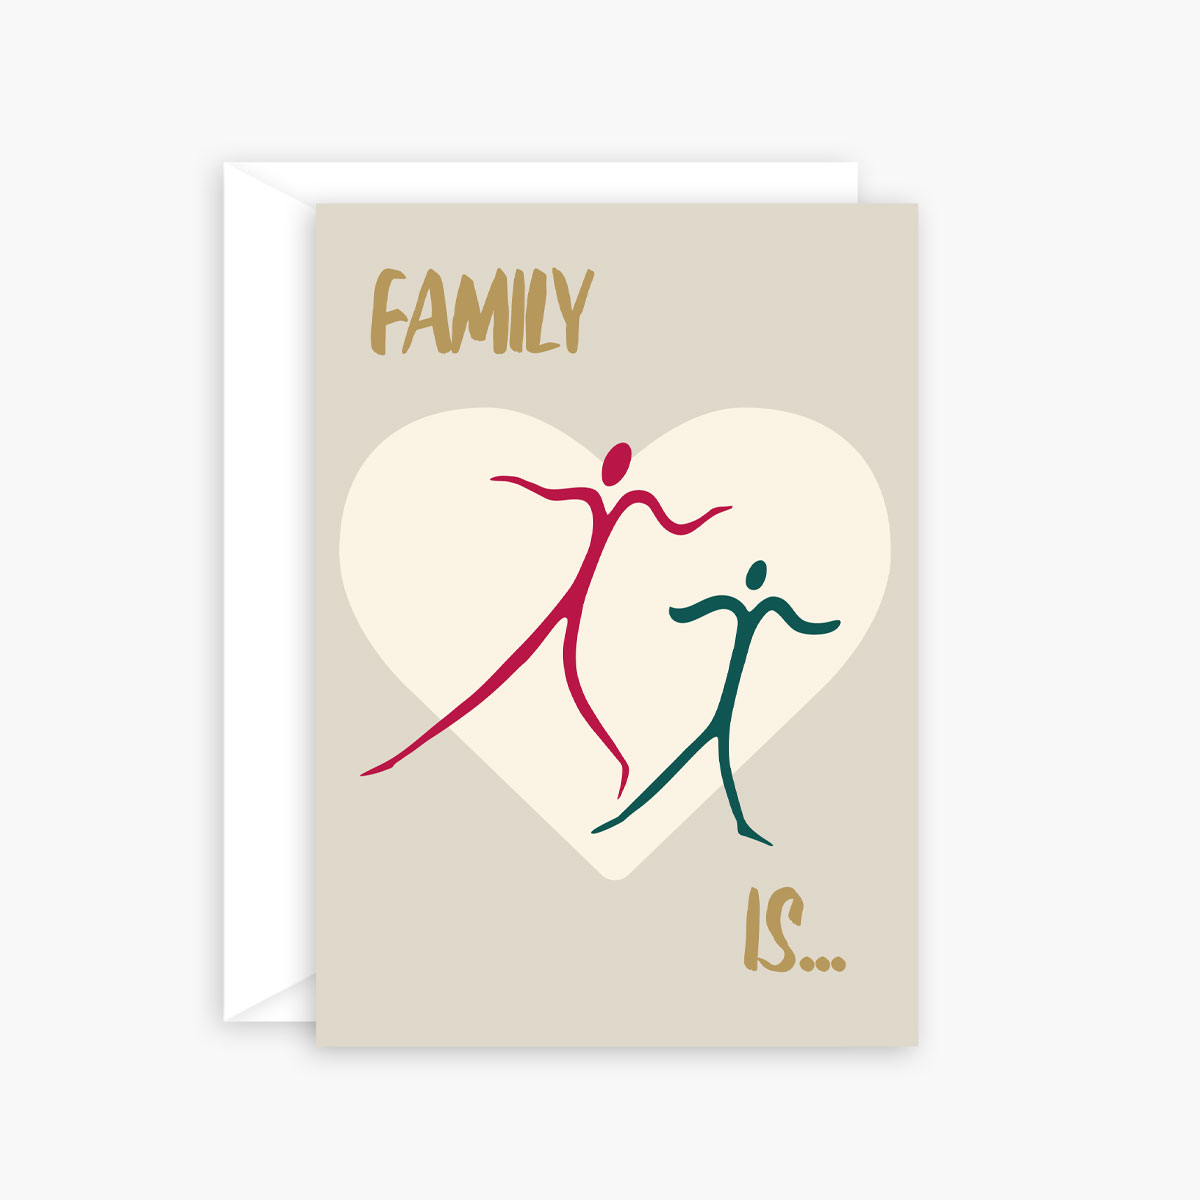 Family is… being with you – greeting card